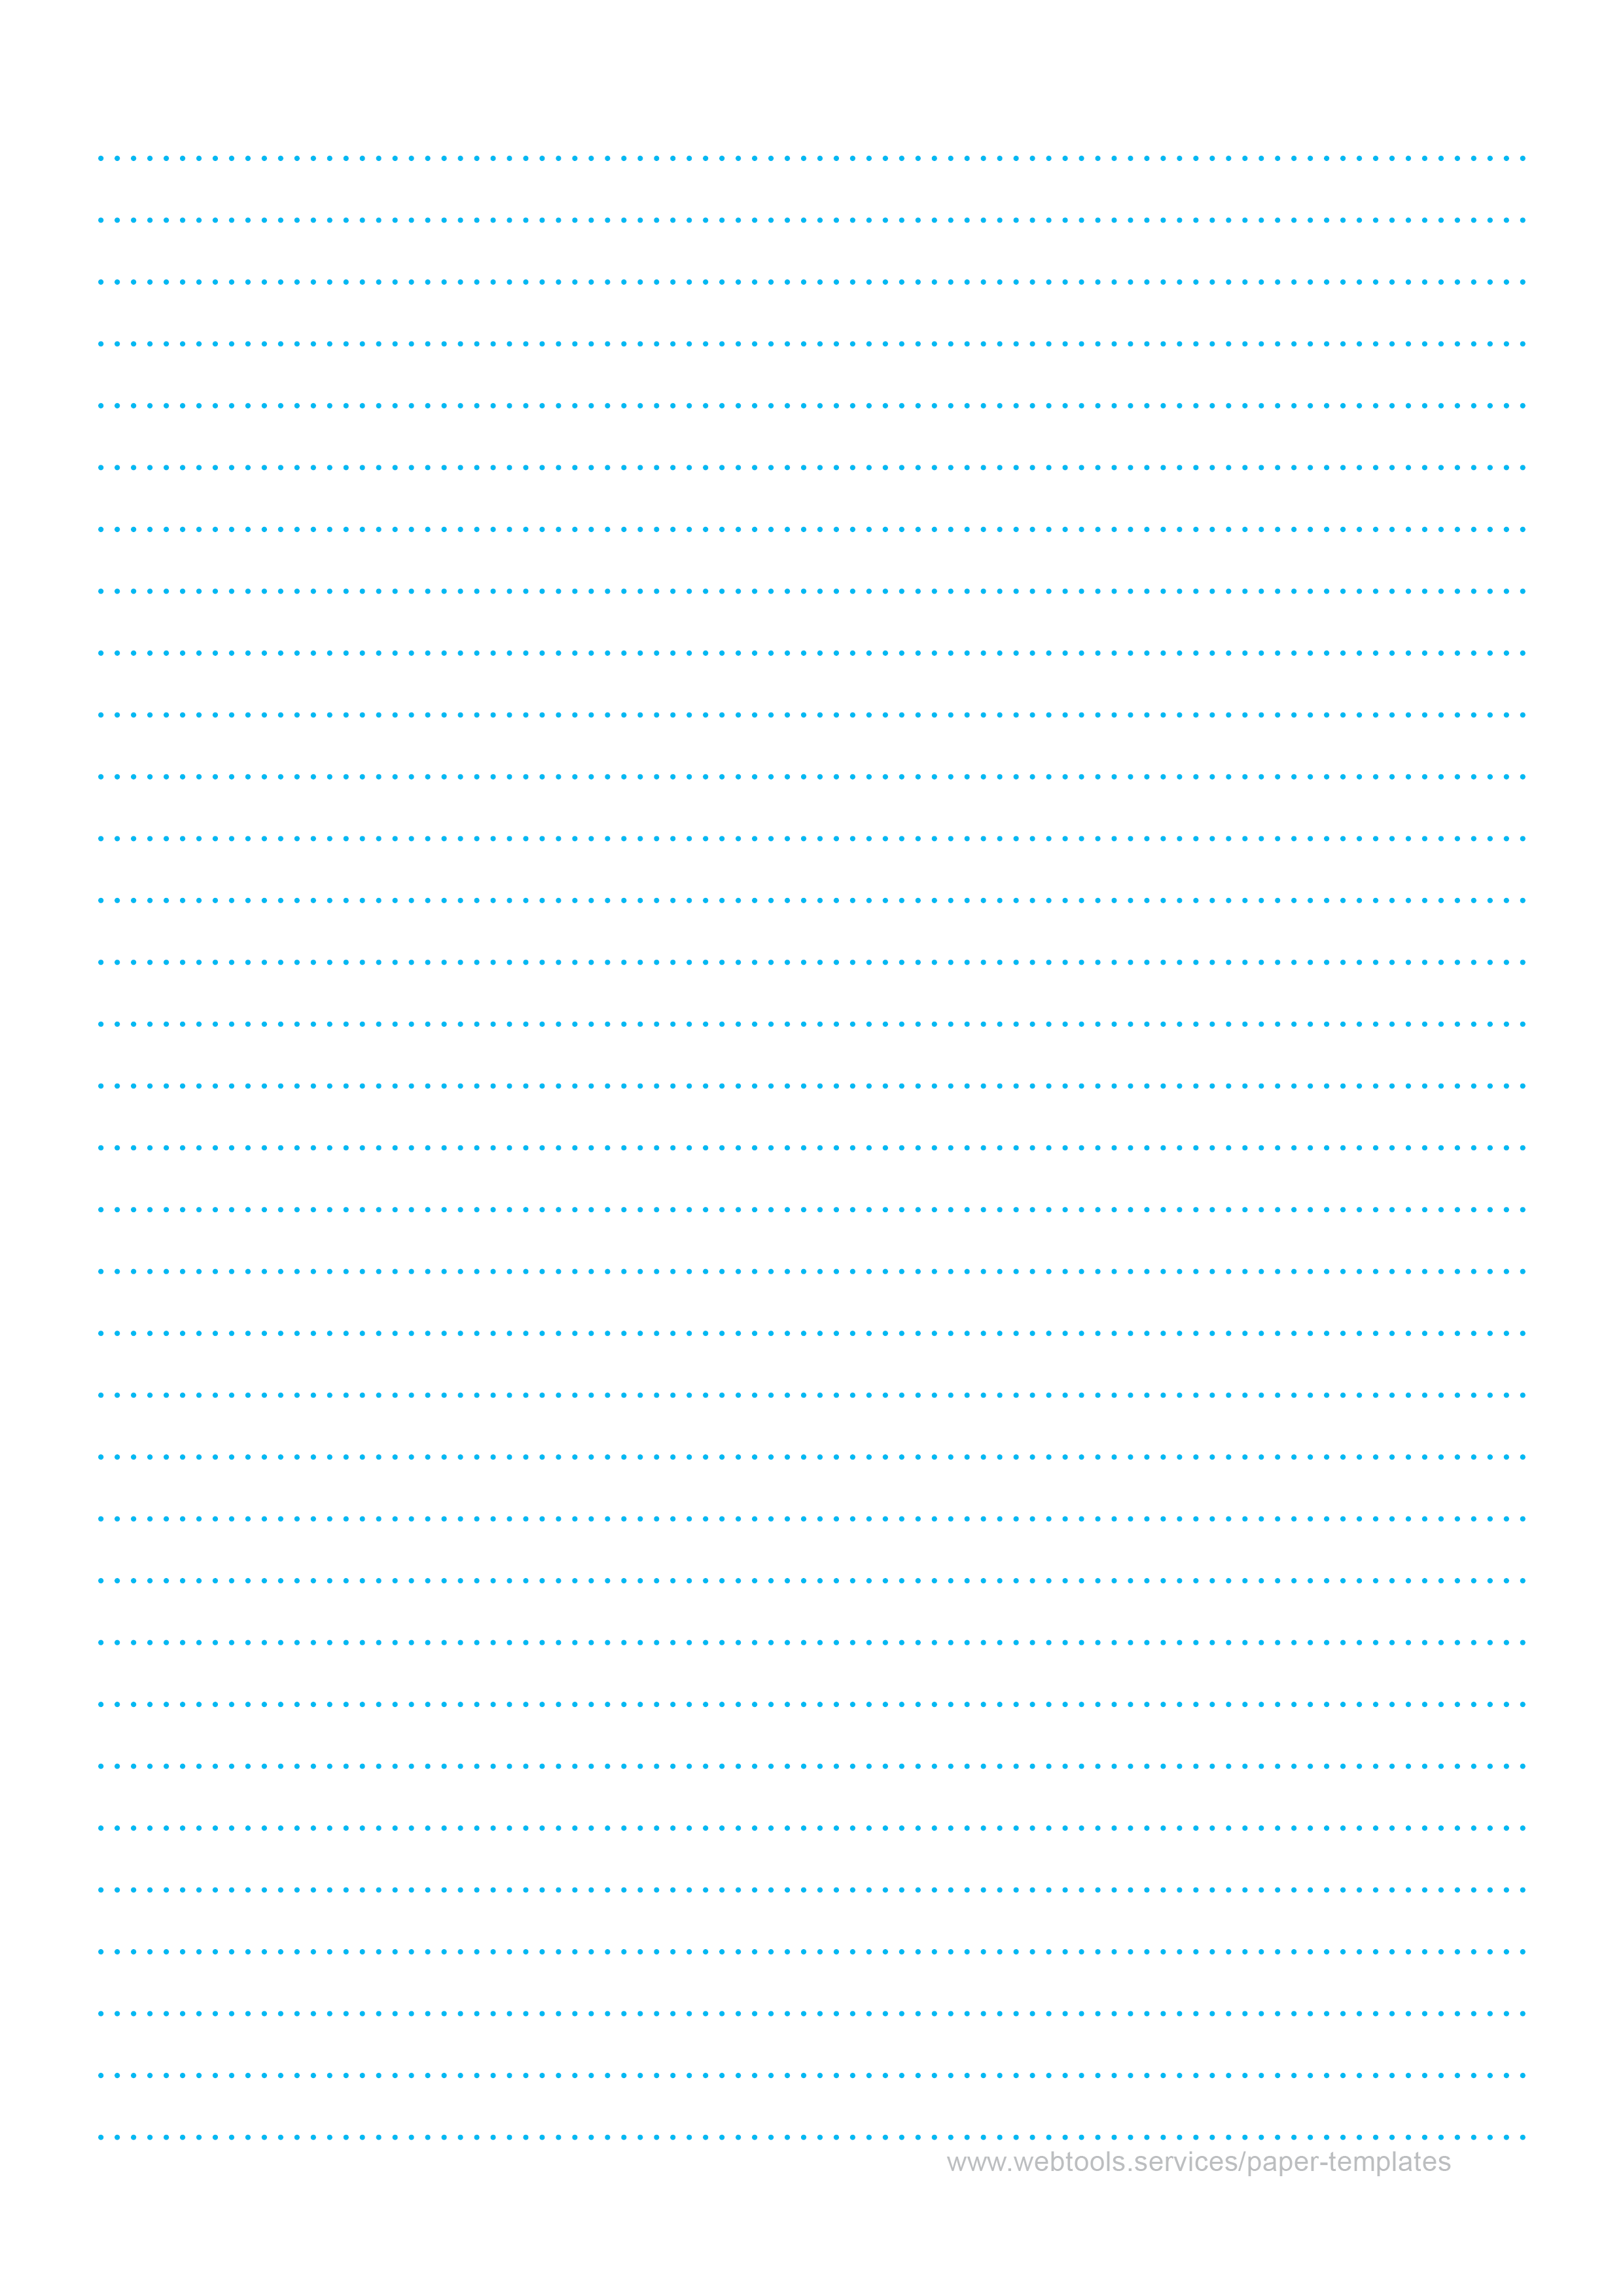 Dotted Blue Lined Paper Template With 8 mm Line Height